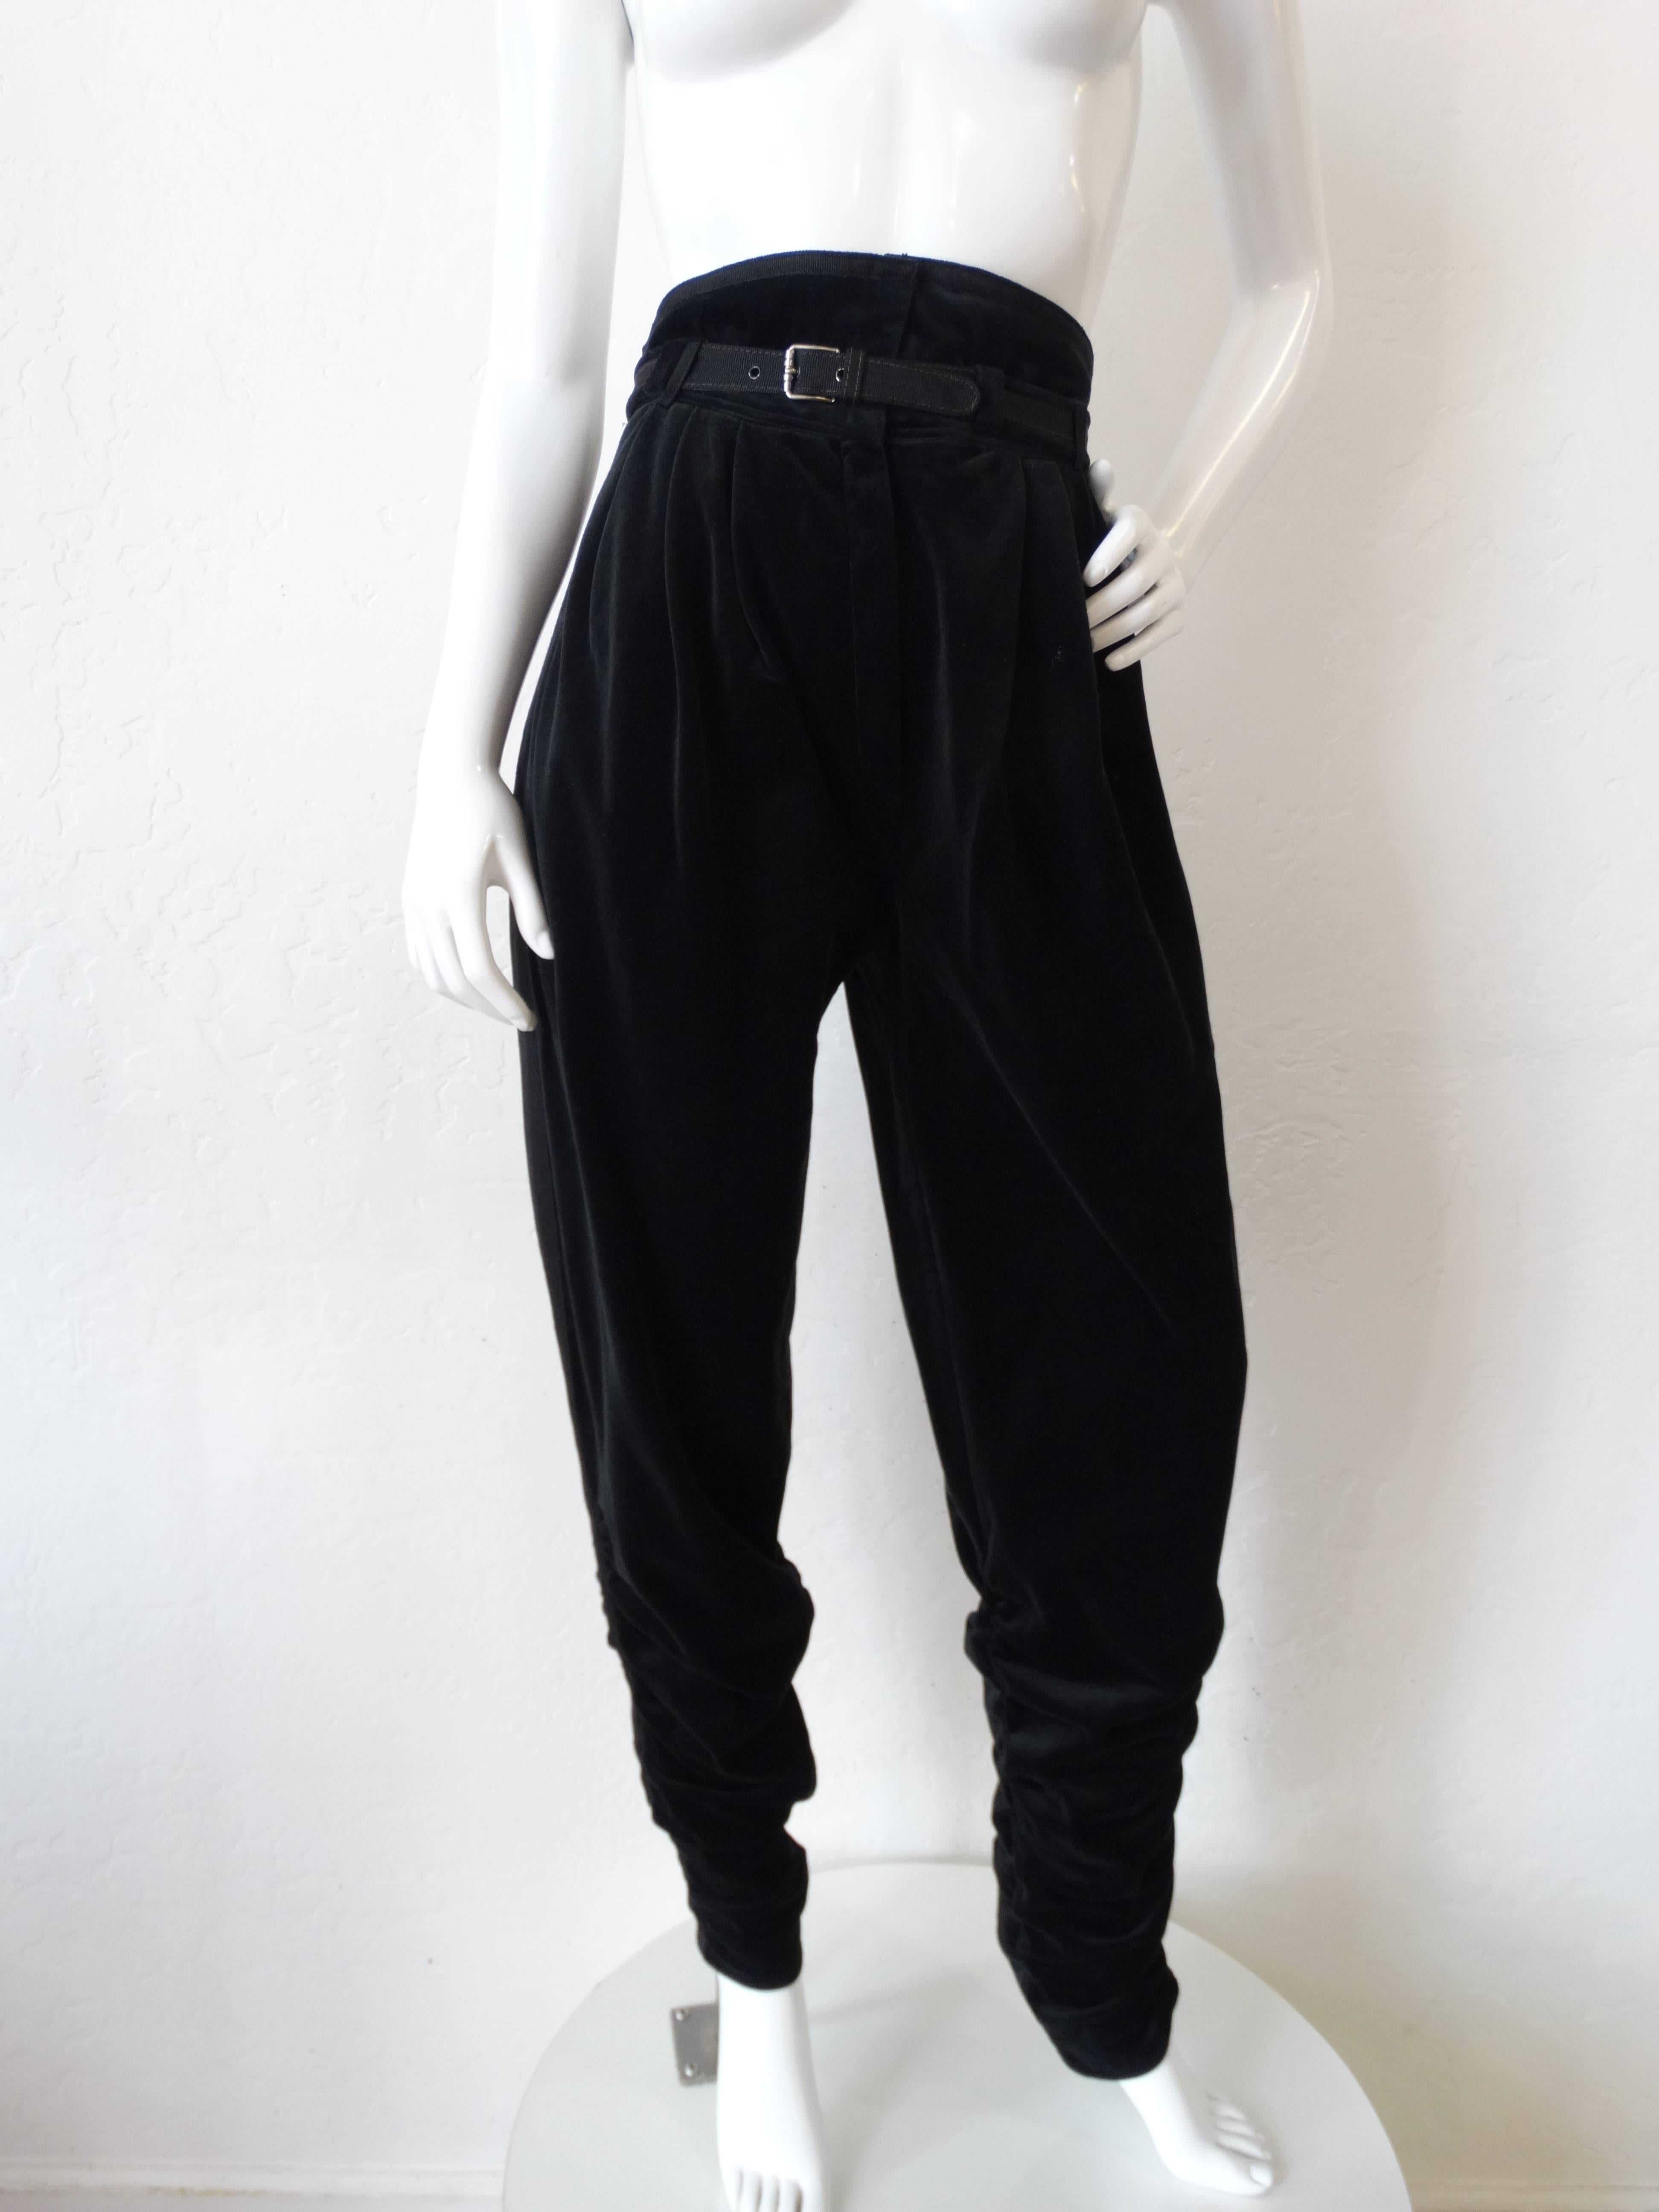 Up your fall wardrobe game in our 1980s Gianni Versace pants! Made of a luxurious midnight black velvet with grosgrain trim accents and matching belt. Super high waisted rise with flattering tapered legs. Velvet gathered around the ankles and legs,